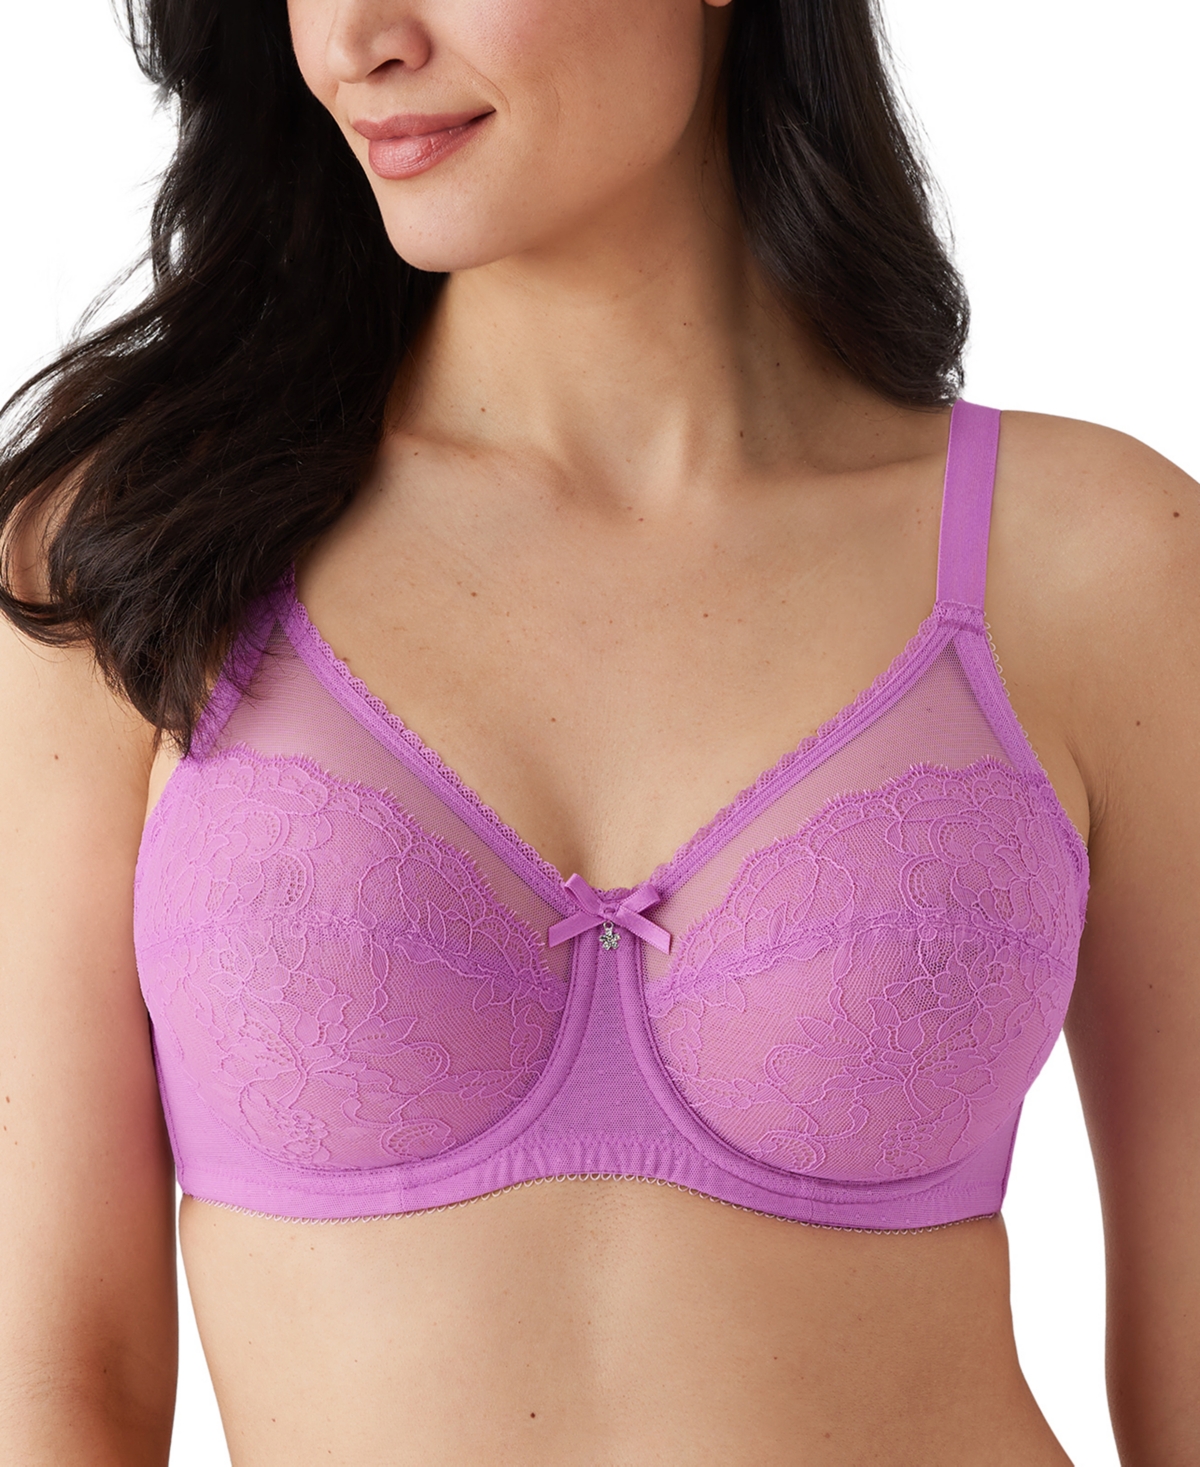 Retro Chic Full-Figure Underwire Bra 855186, Up To J Cup - First Bloom